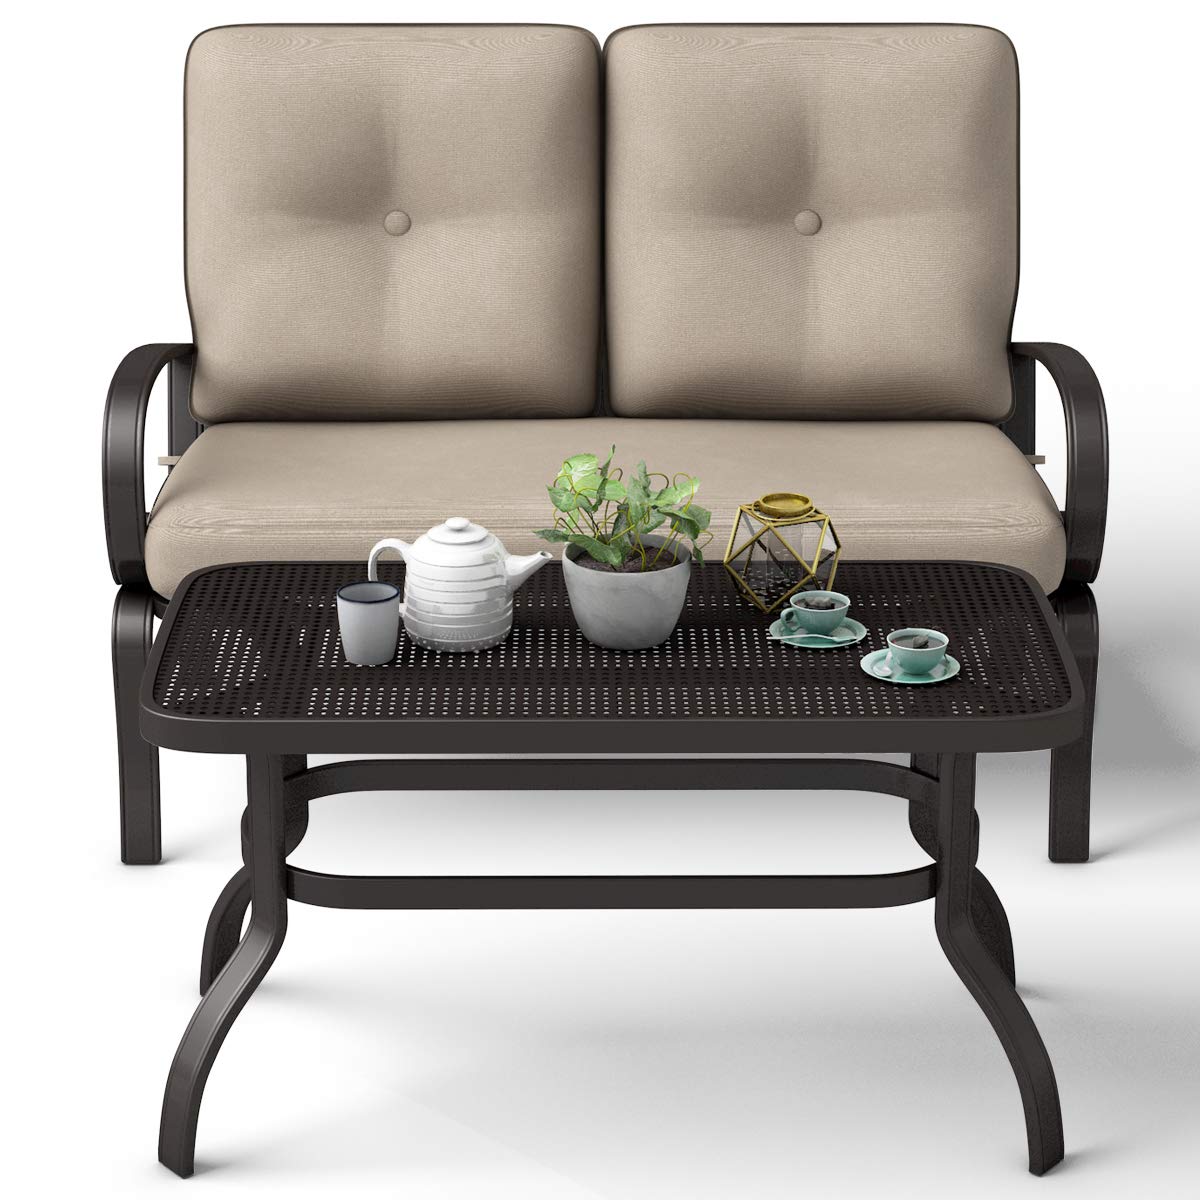 2 Pcs Patio Loveseat with Coffee Table Outdoor Bench with Cushion and Metal Frame(Beige & Black)